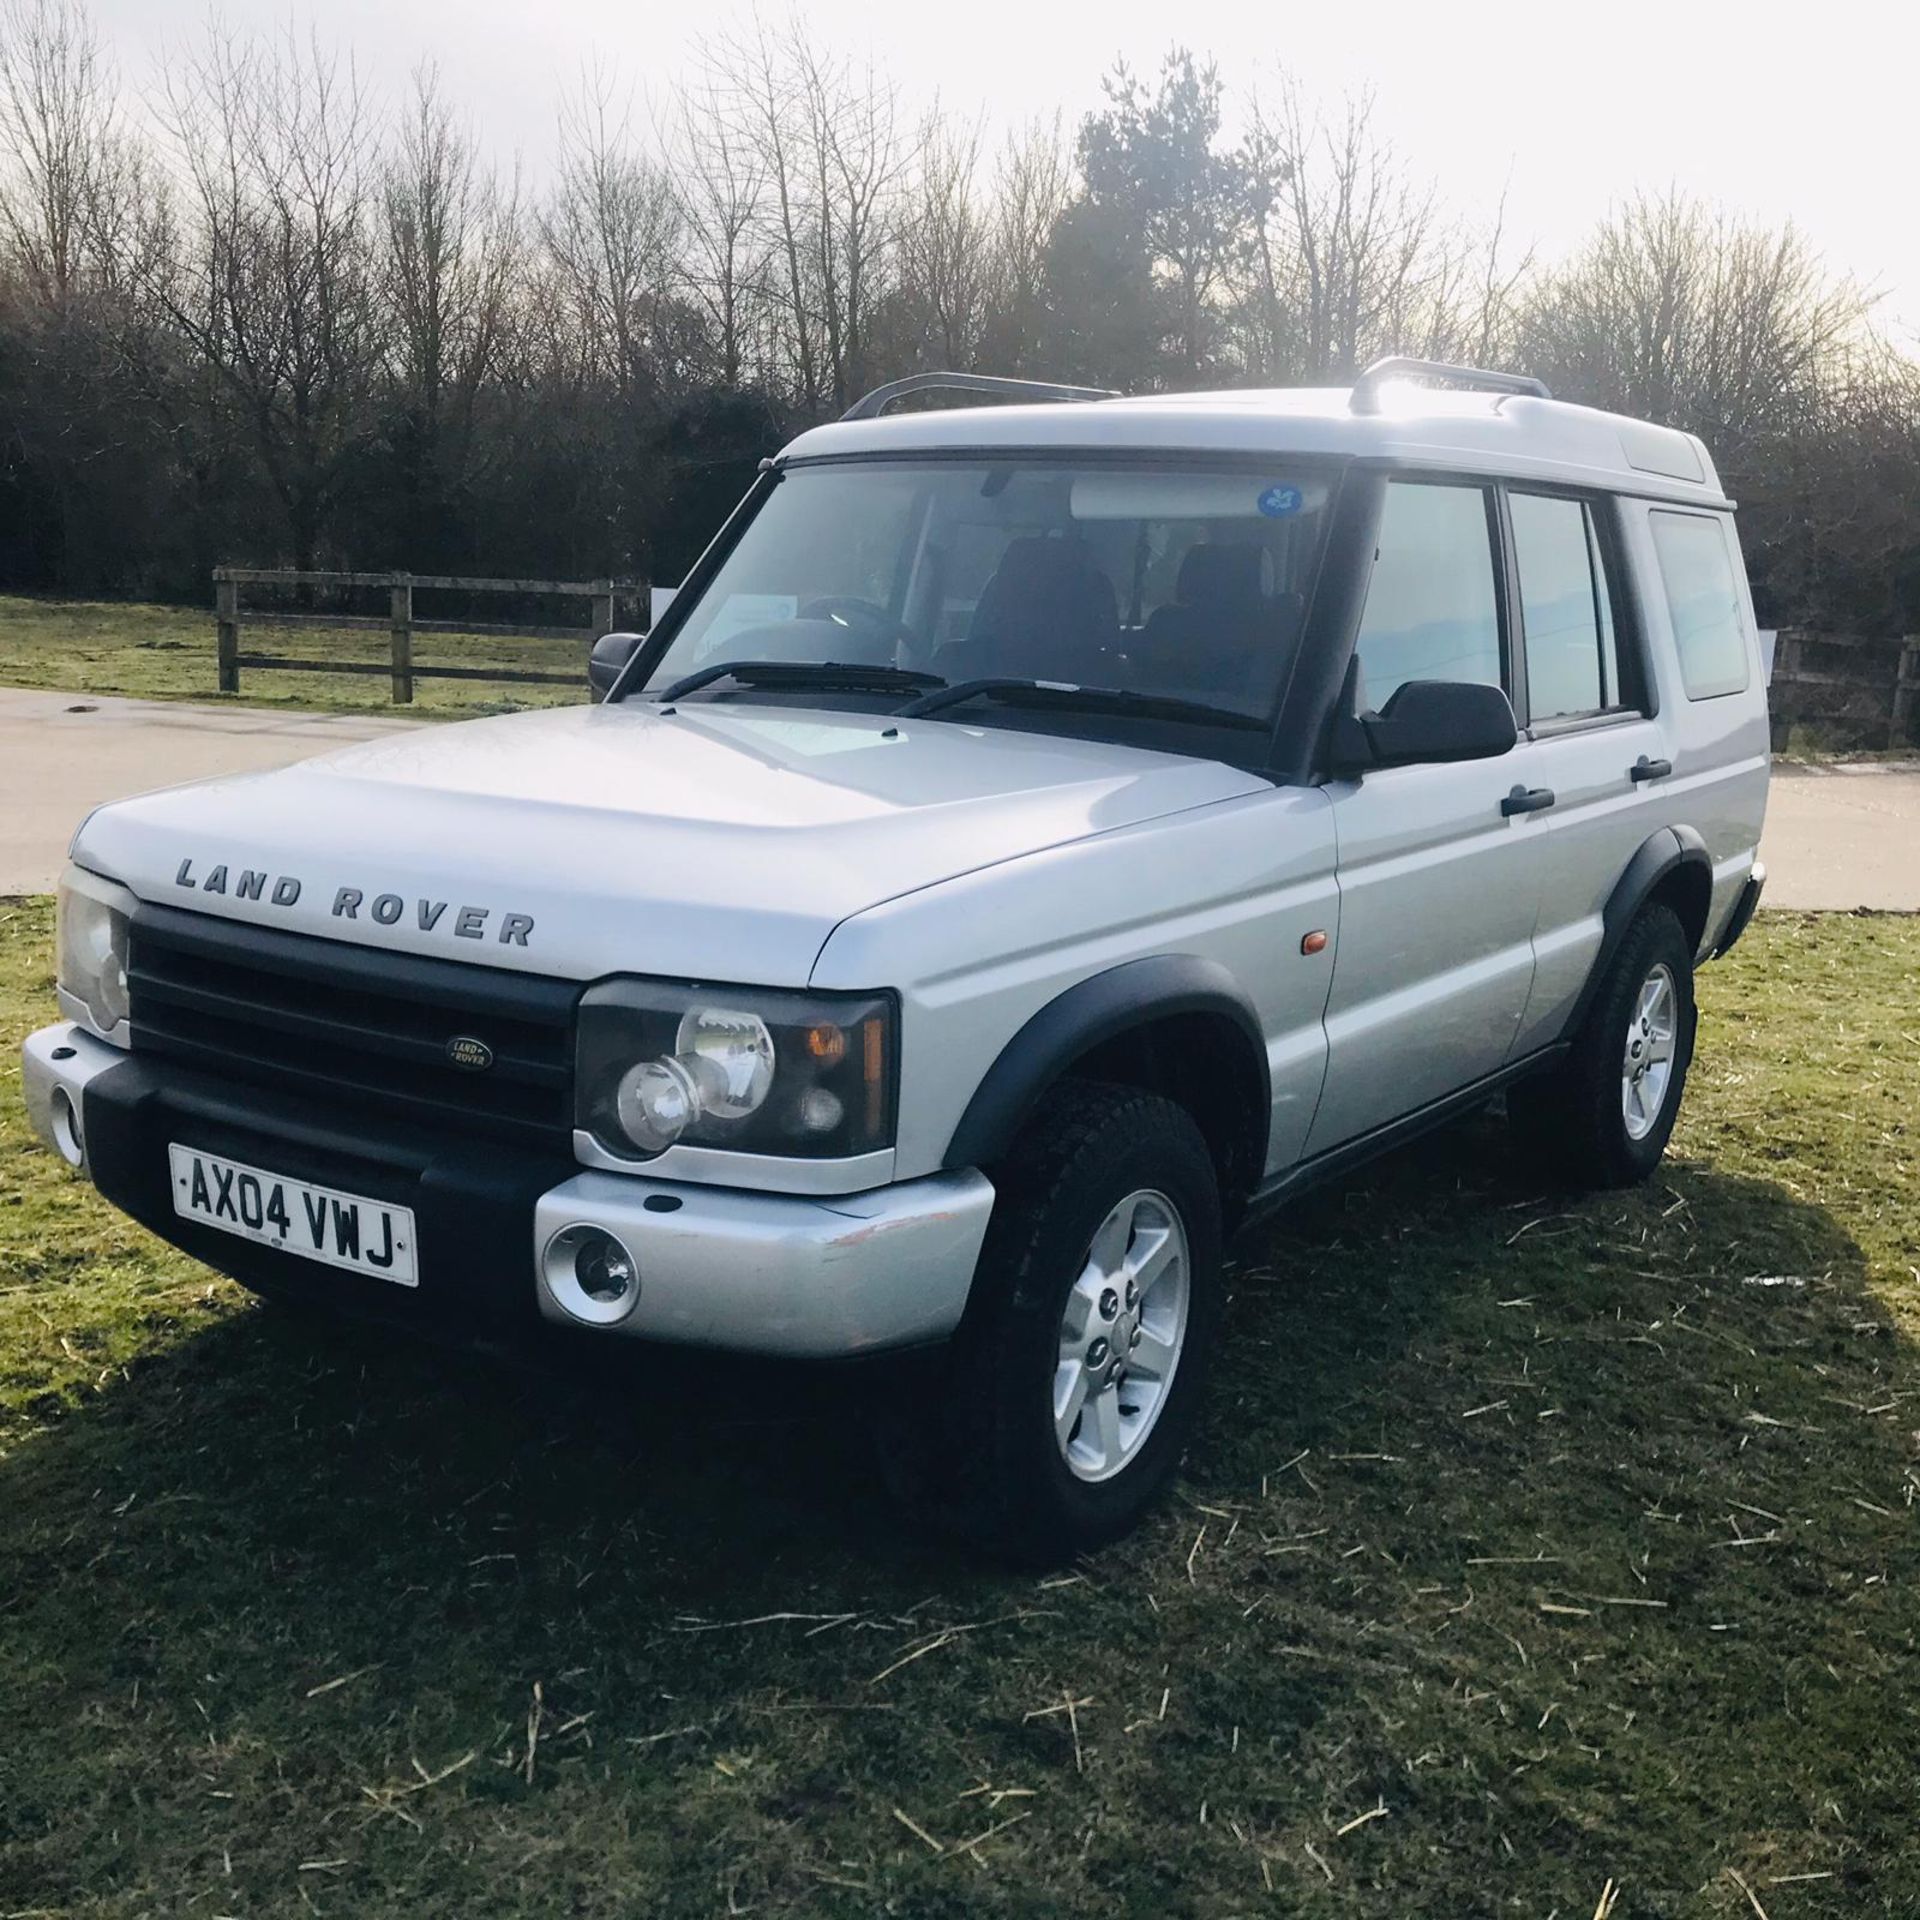 (RESERVE MET) Land Rover Discovery Pursuit 2.5 Td5 - 2004 04 Reg - 7 Seater - Air con - Tow Bar - Image 2 of 17